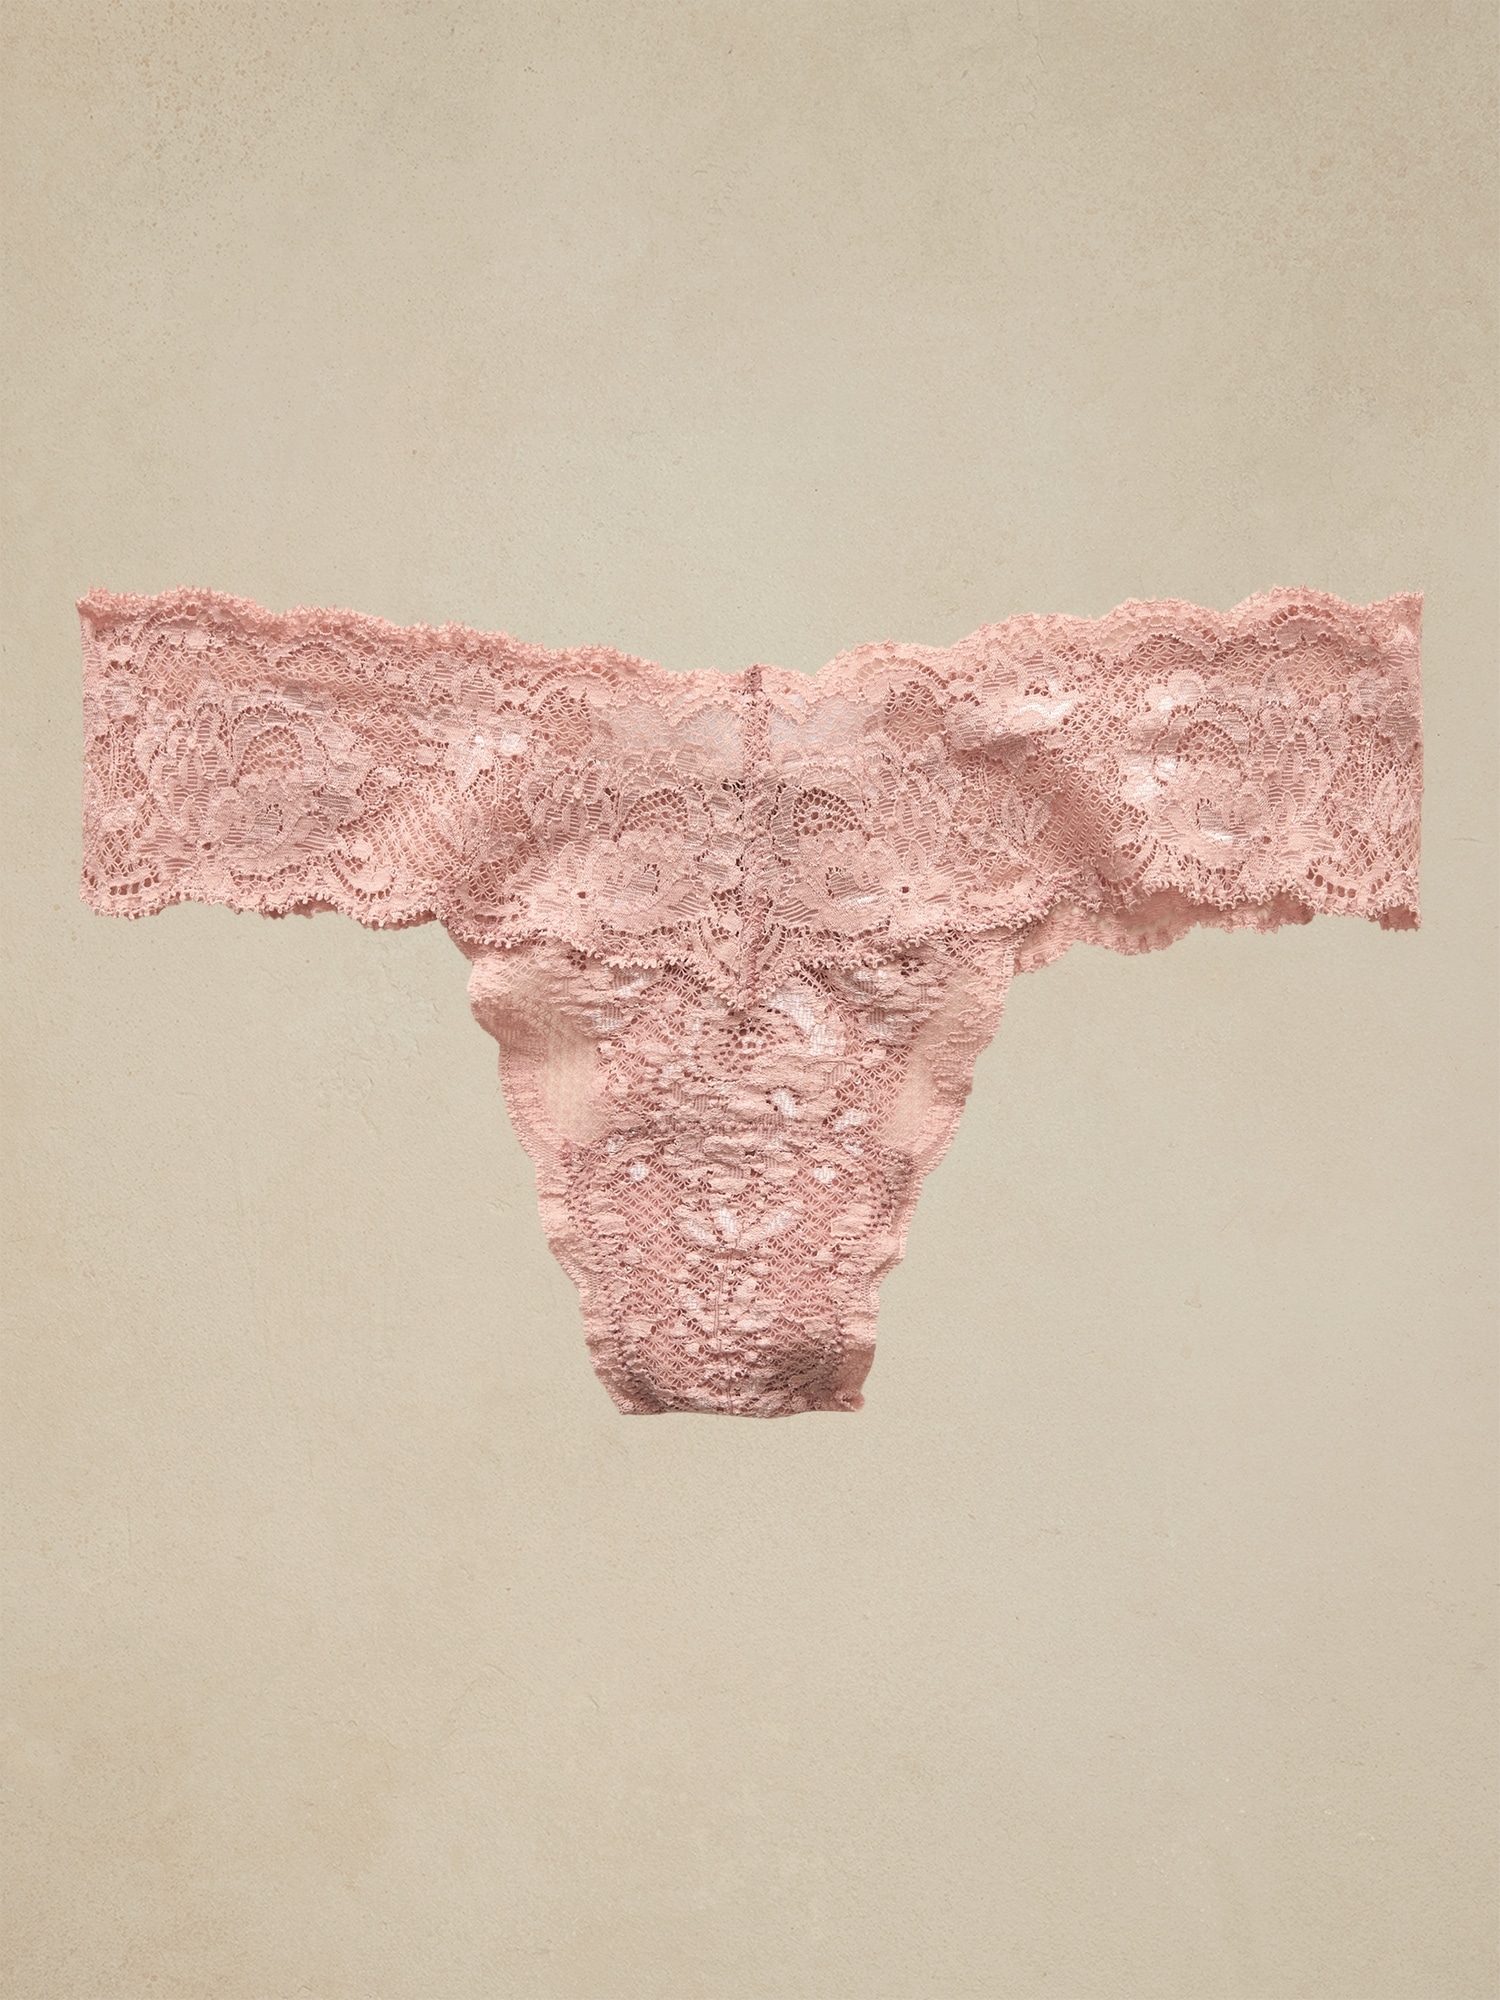 Cosabella &#124 Never Say Never Cutie Lace Thong